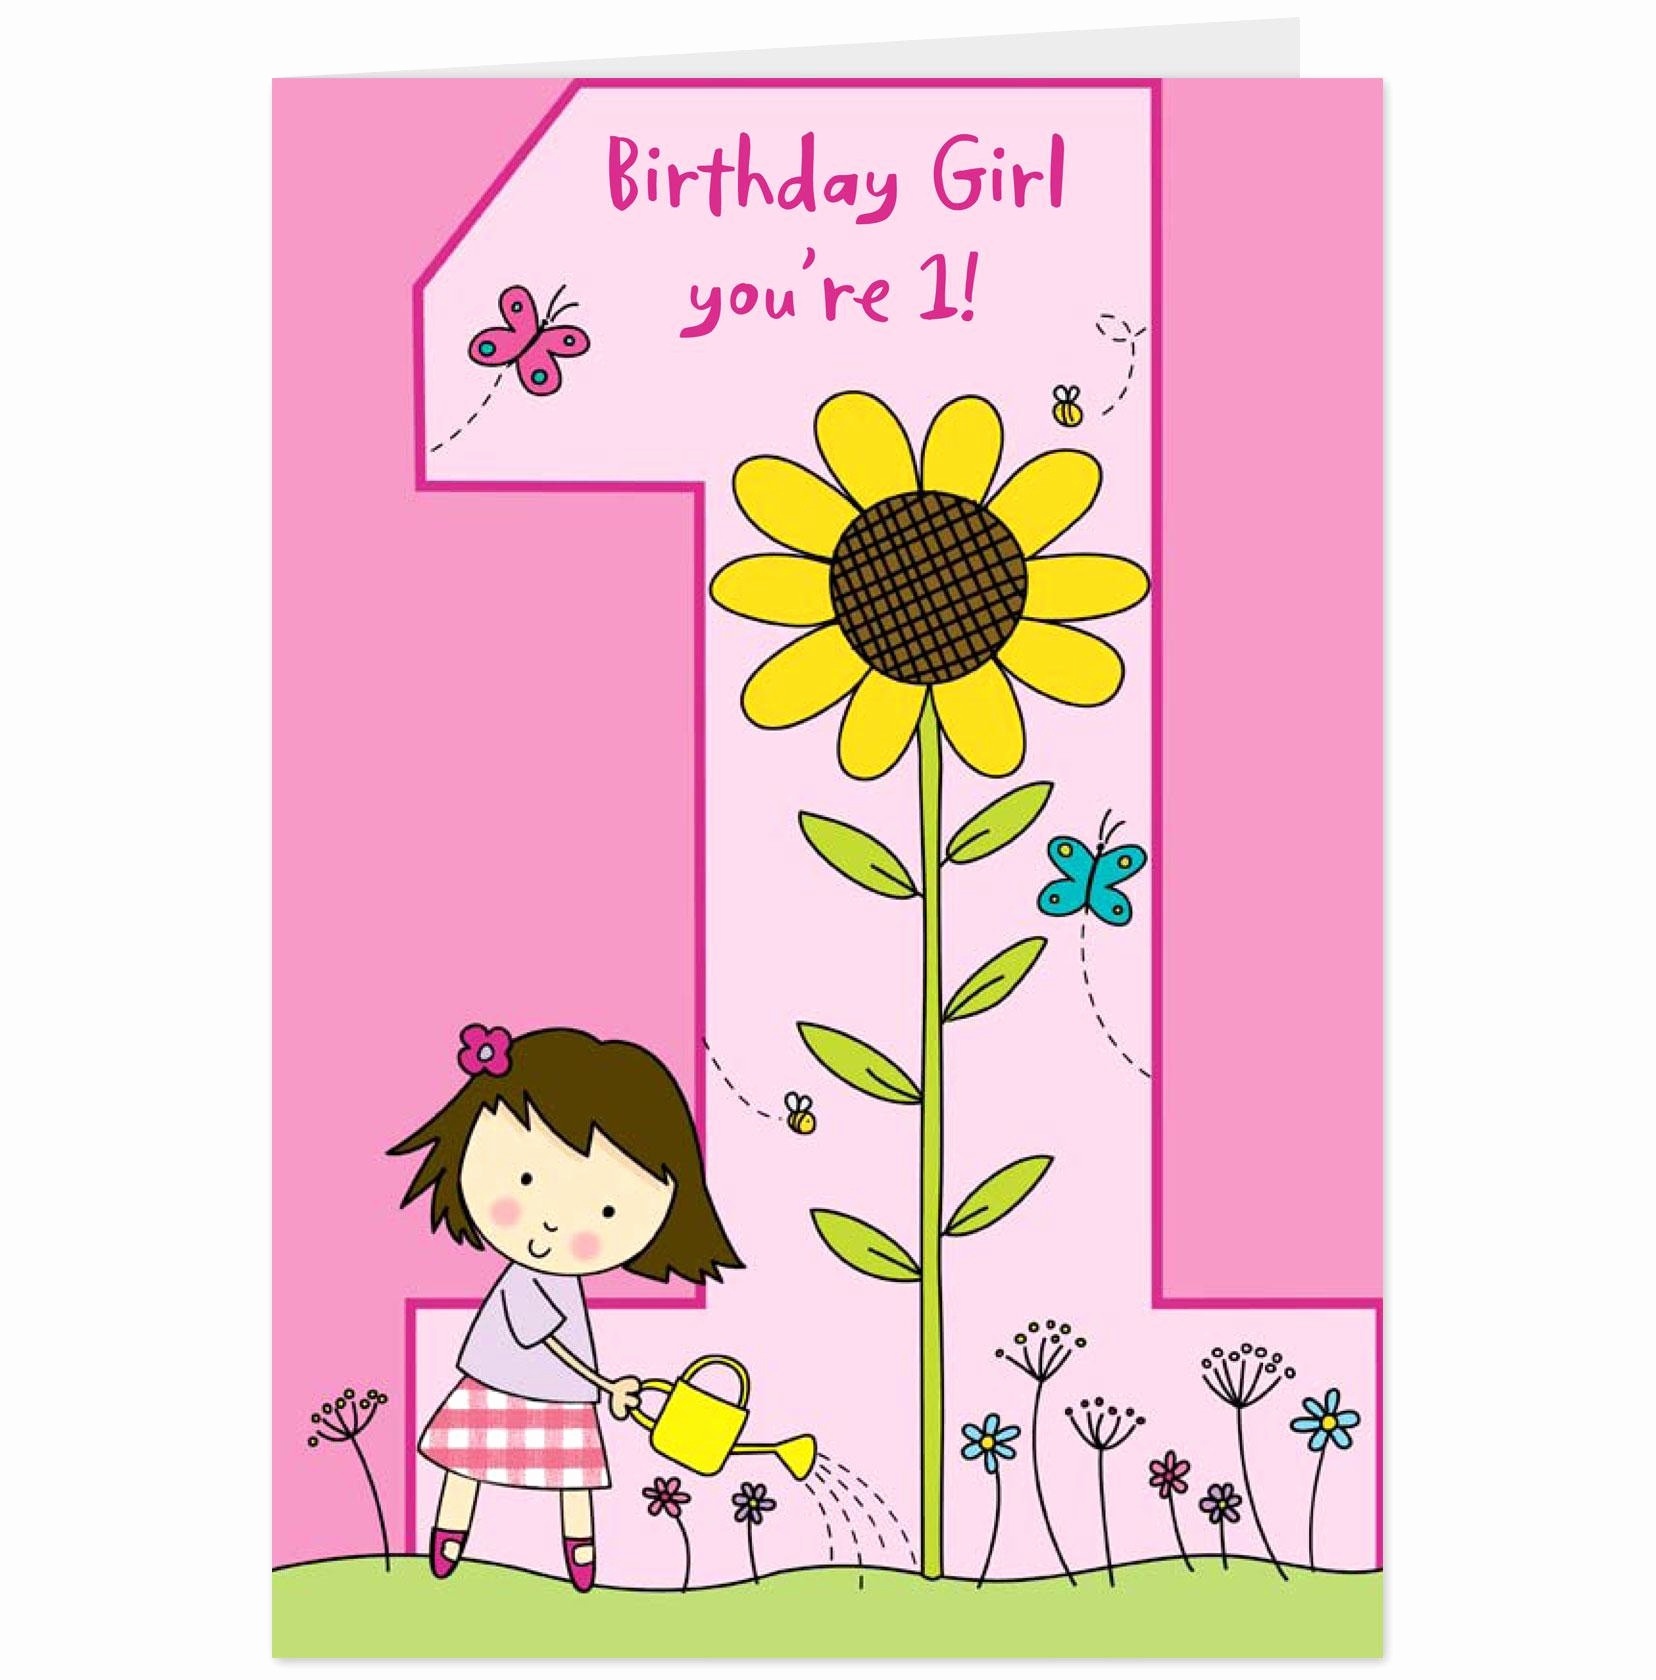 Print Free Birthday Cards At Home -12 Lovely Free Printable Hallmark - Free Printable Hallmark Birthday Cards